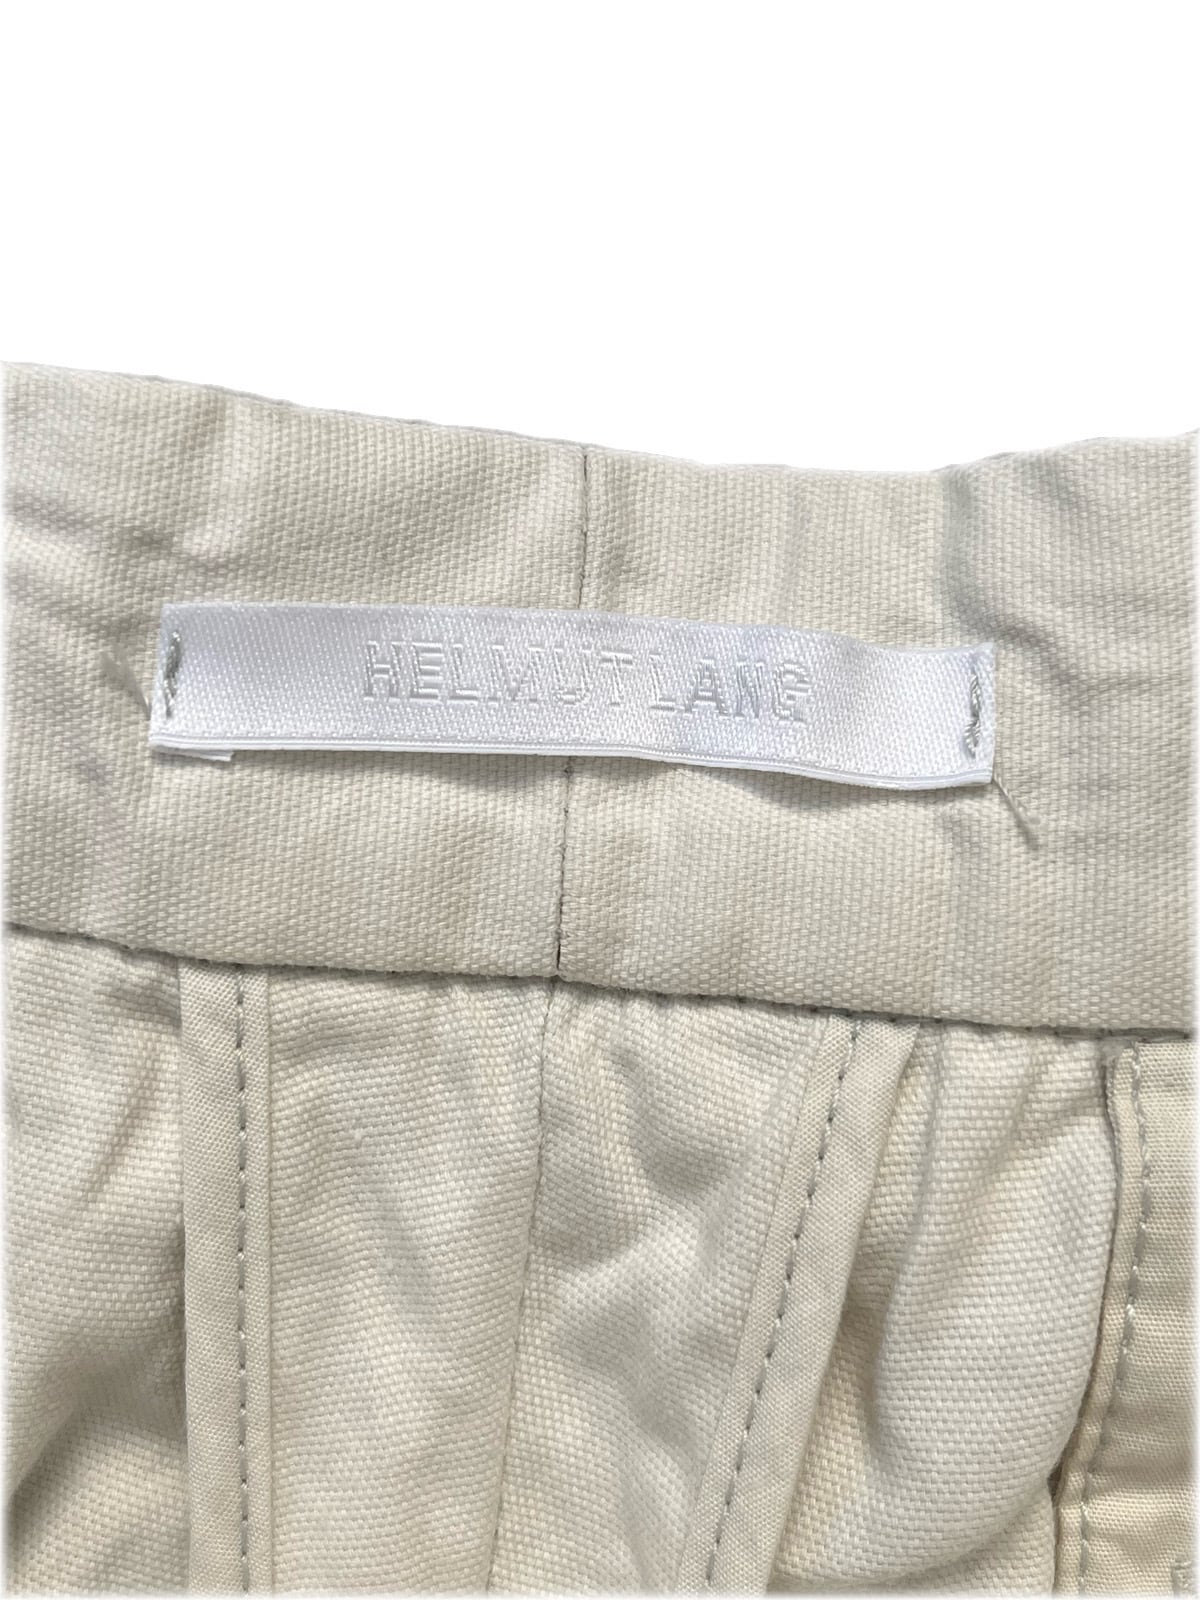 helmut lang ヘルムートラング 本人期 03ss inside out cargo pants ...